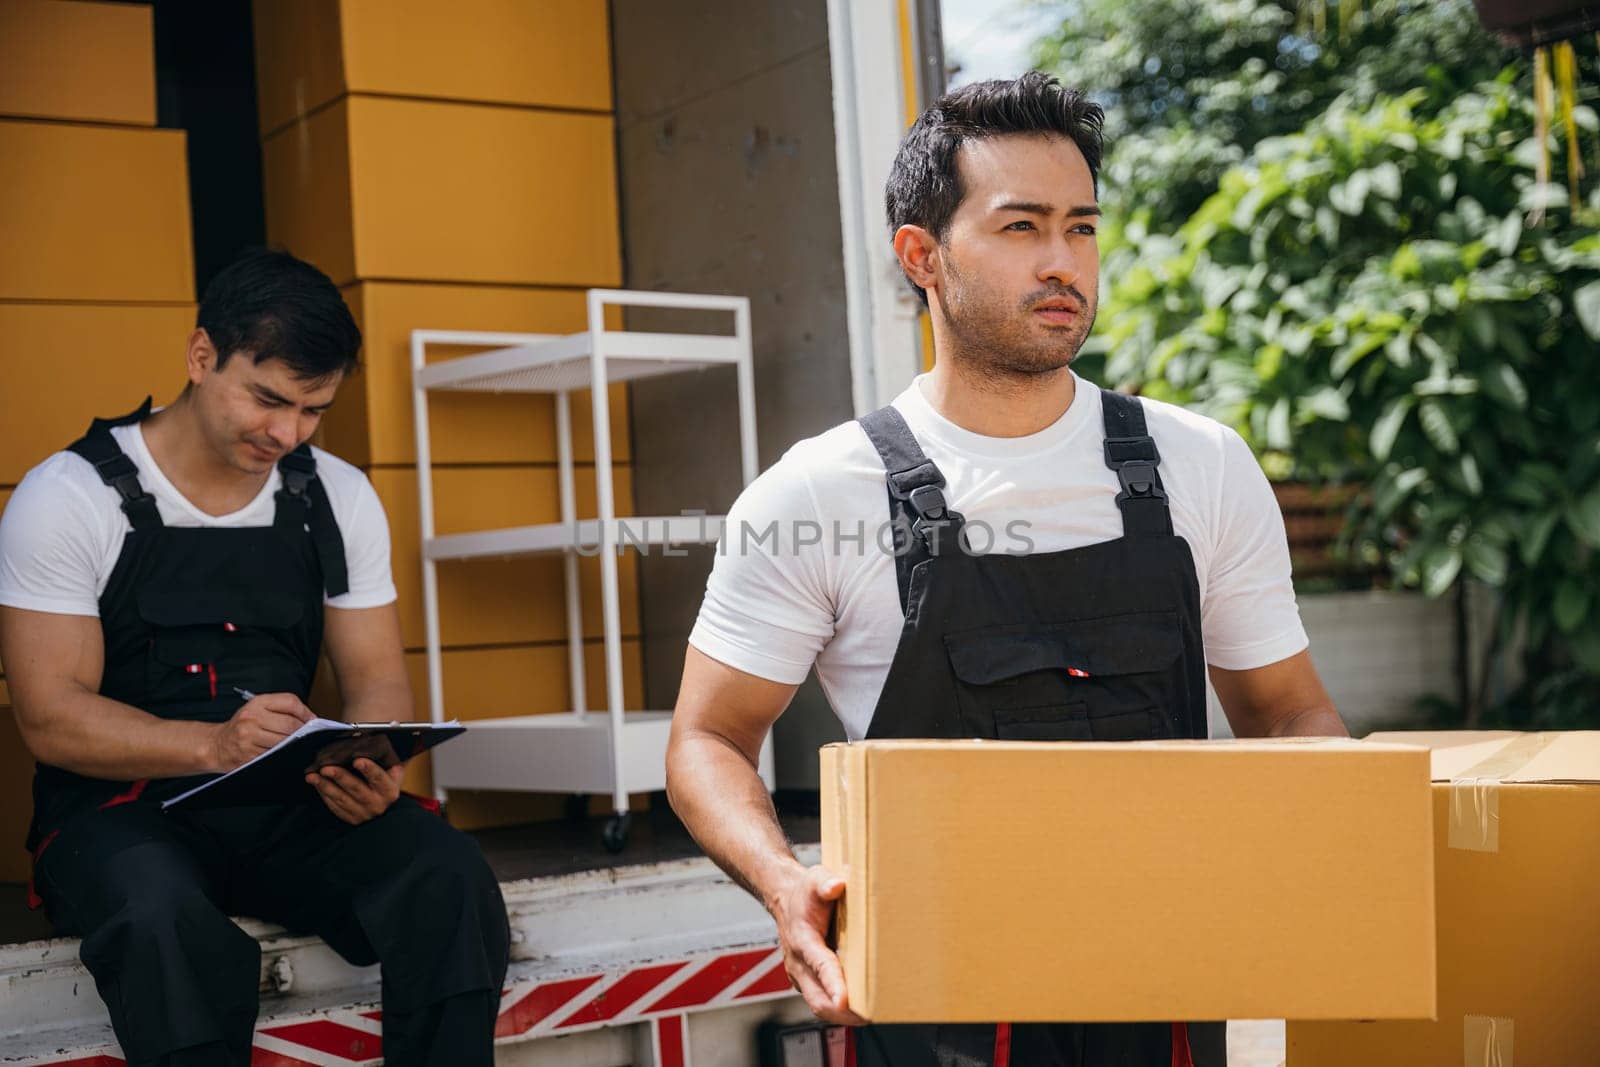 Uniformed workers unload boxes inspecting checklist with a clipboard at the truck. Professional delivery team guarantees efficient relocation and reliable service. Moving day concept by Sorapop